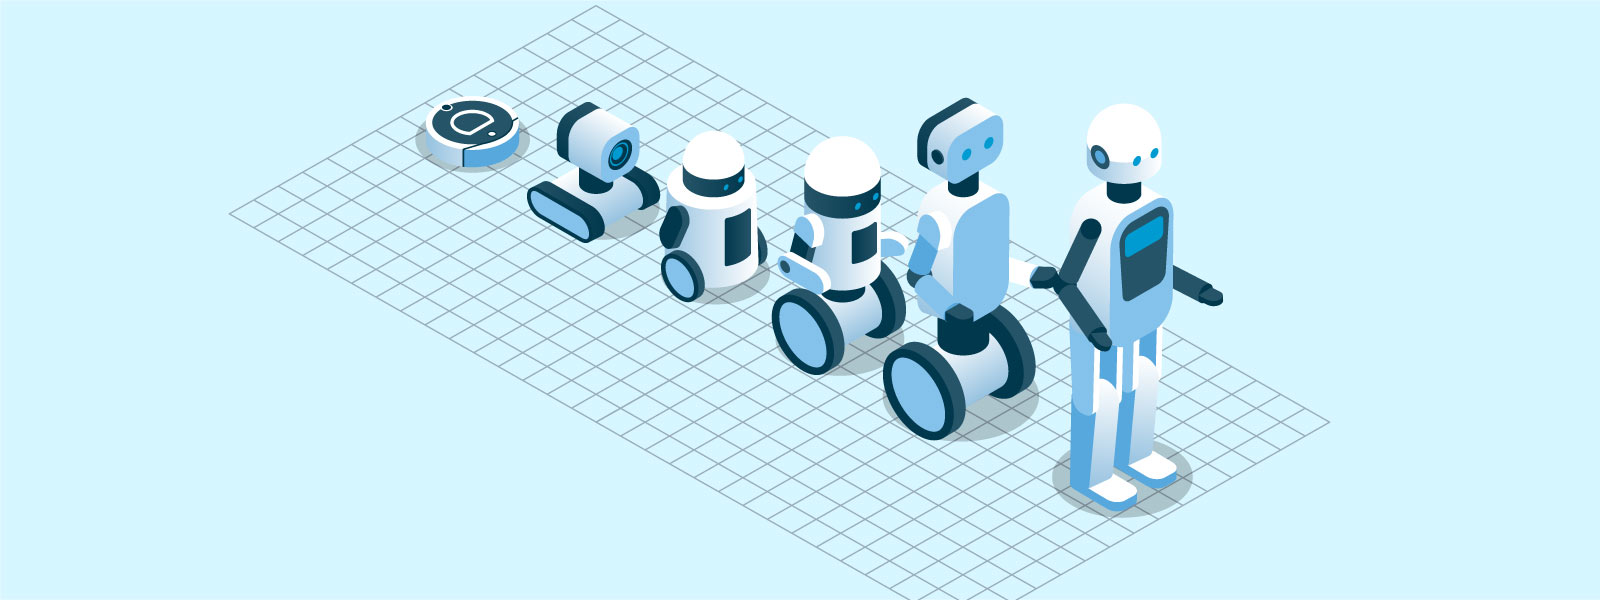 Various robotic designs on a grid, showcasing an evolution of robotics from simple to more complex humanoid forms, possibly indicating advancements in robotic technology.